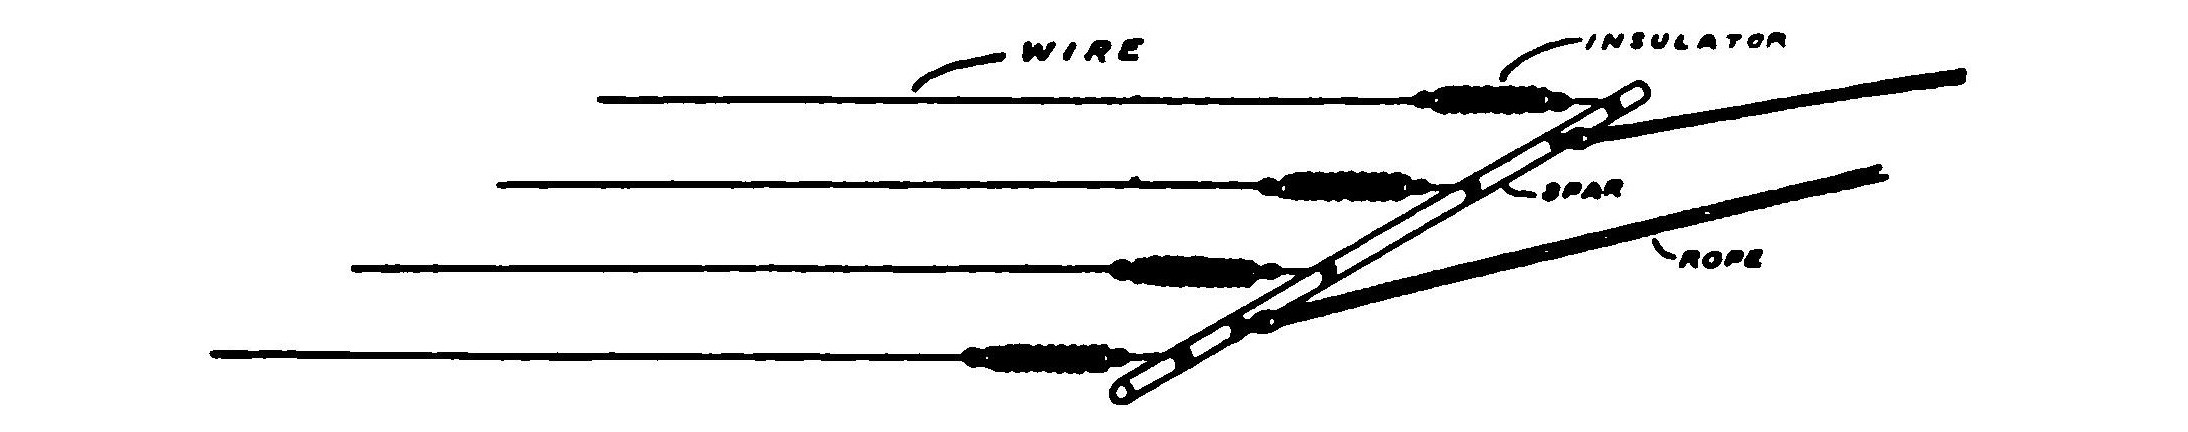 FIG. 24.—Showing how wires are arranged and insulated.